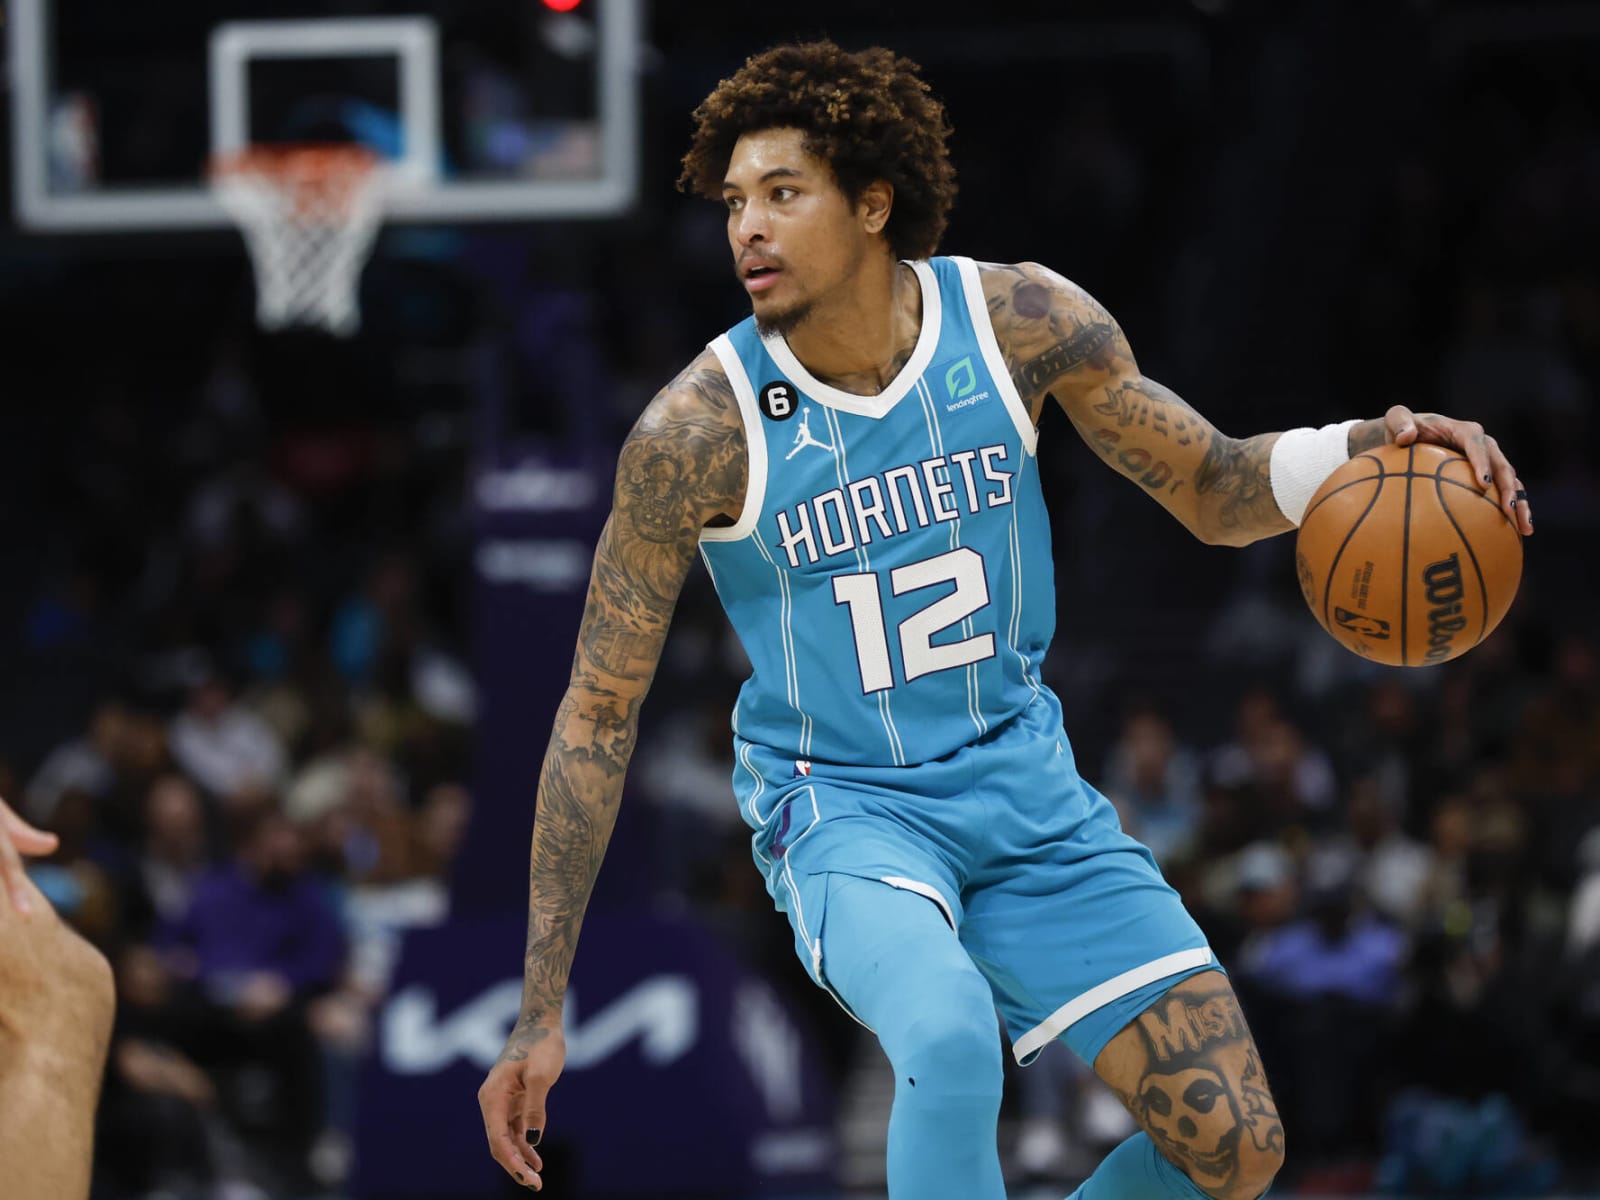 Breaking: Kelly Oubre Jr is expected to sign a one-year deal with the  Philadelphia 76ers, sources tell Adrian Wojnarowski.